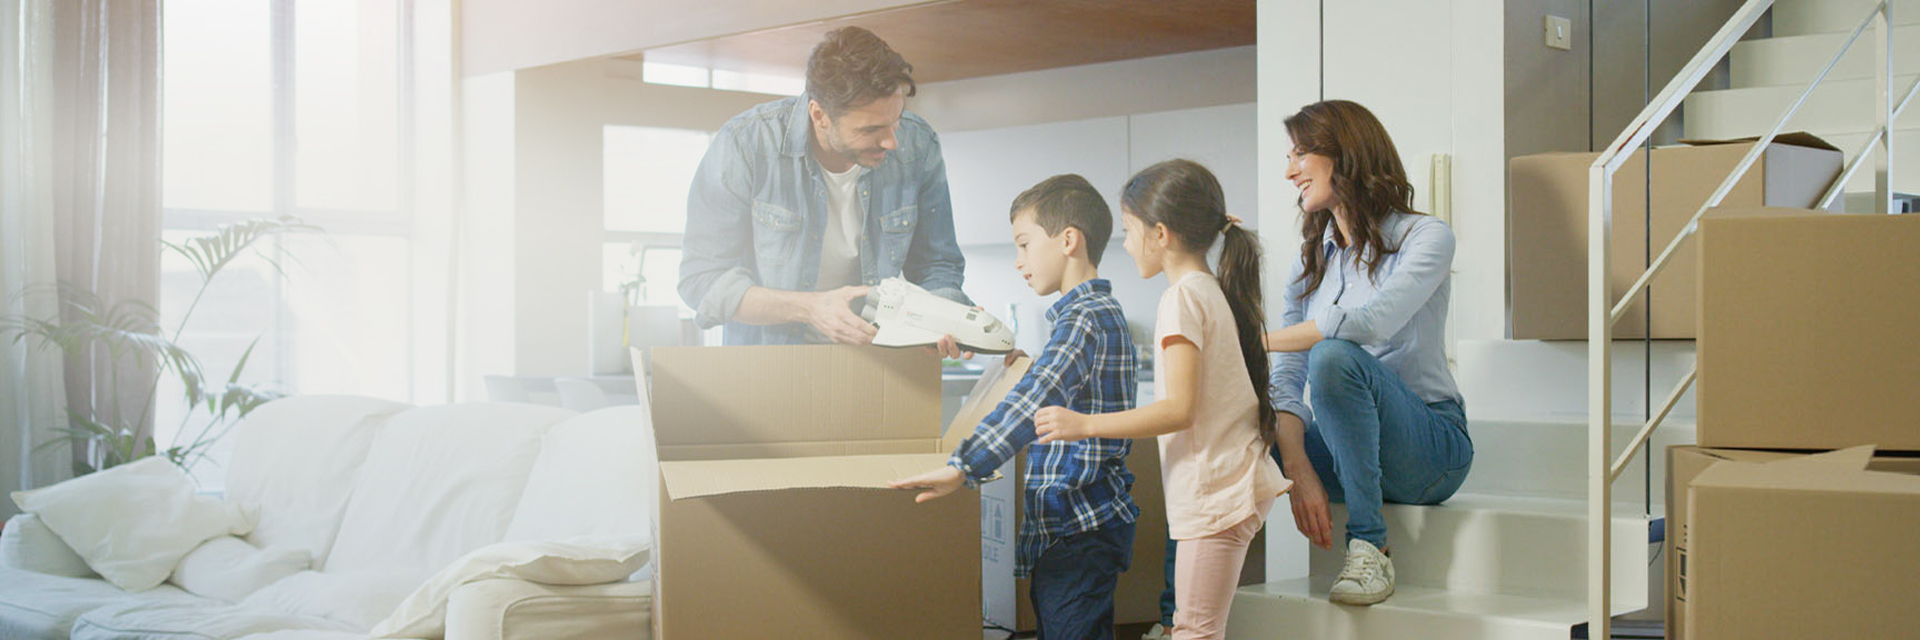 Image showing a family unpacking boxes together